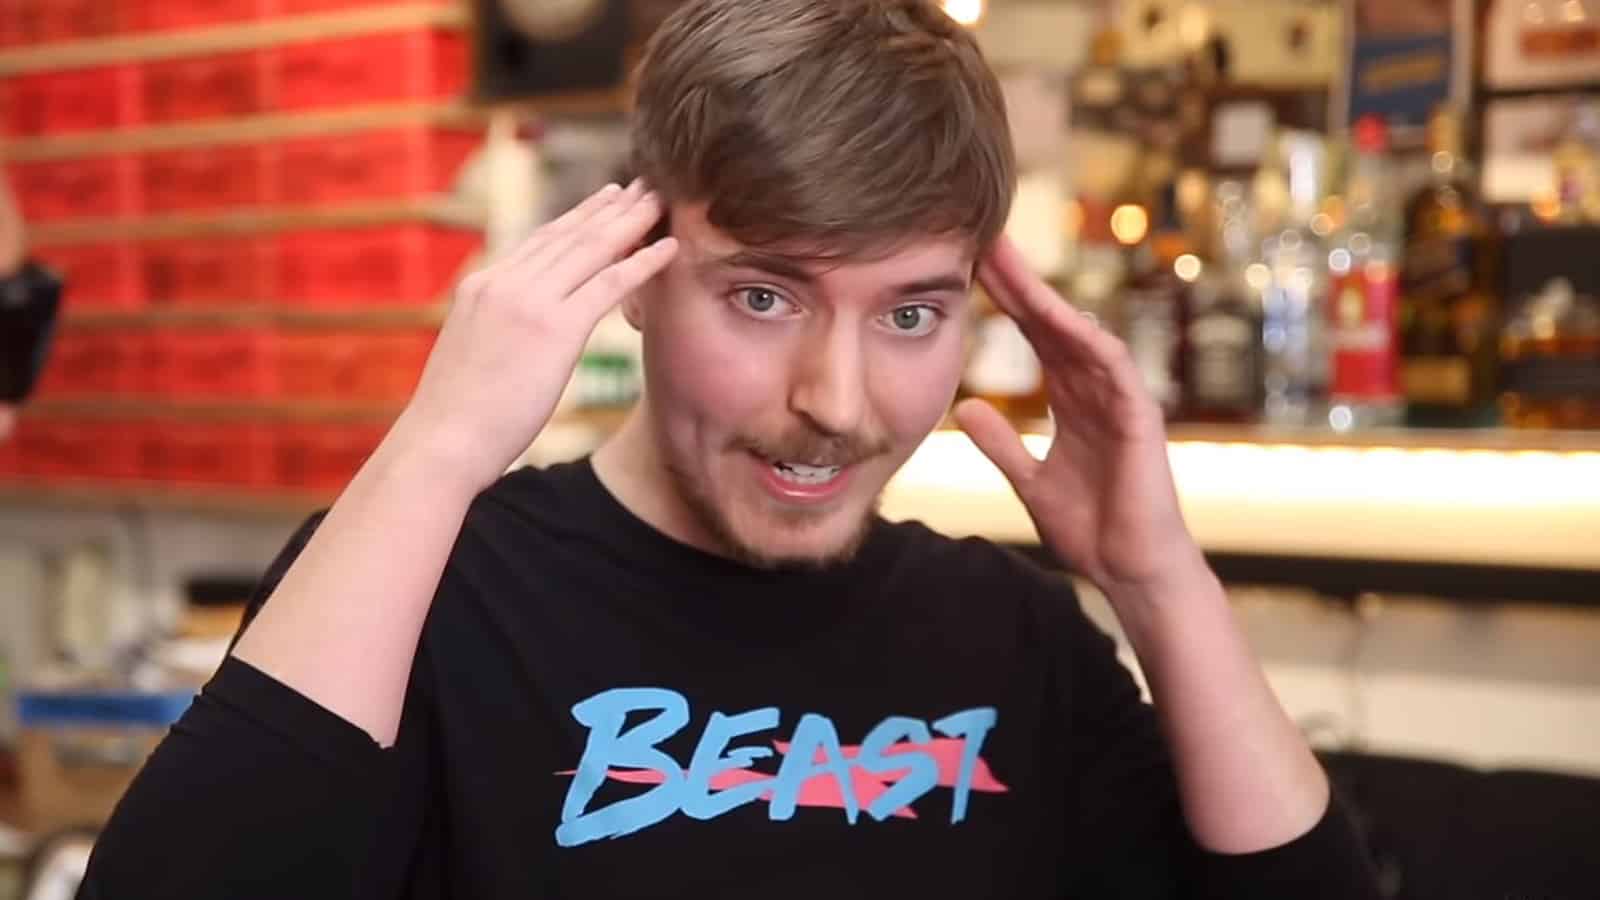 MrBeast accused of bullying by former editors